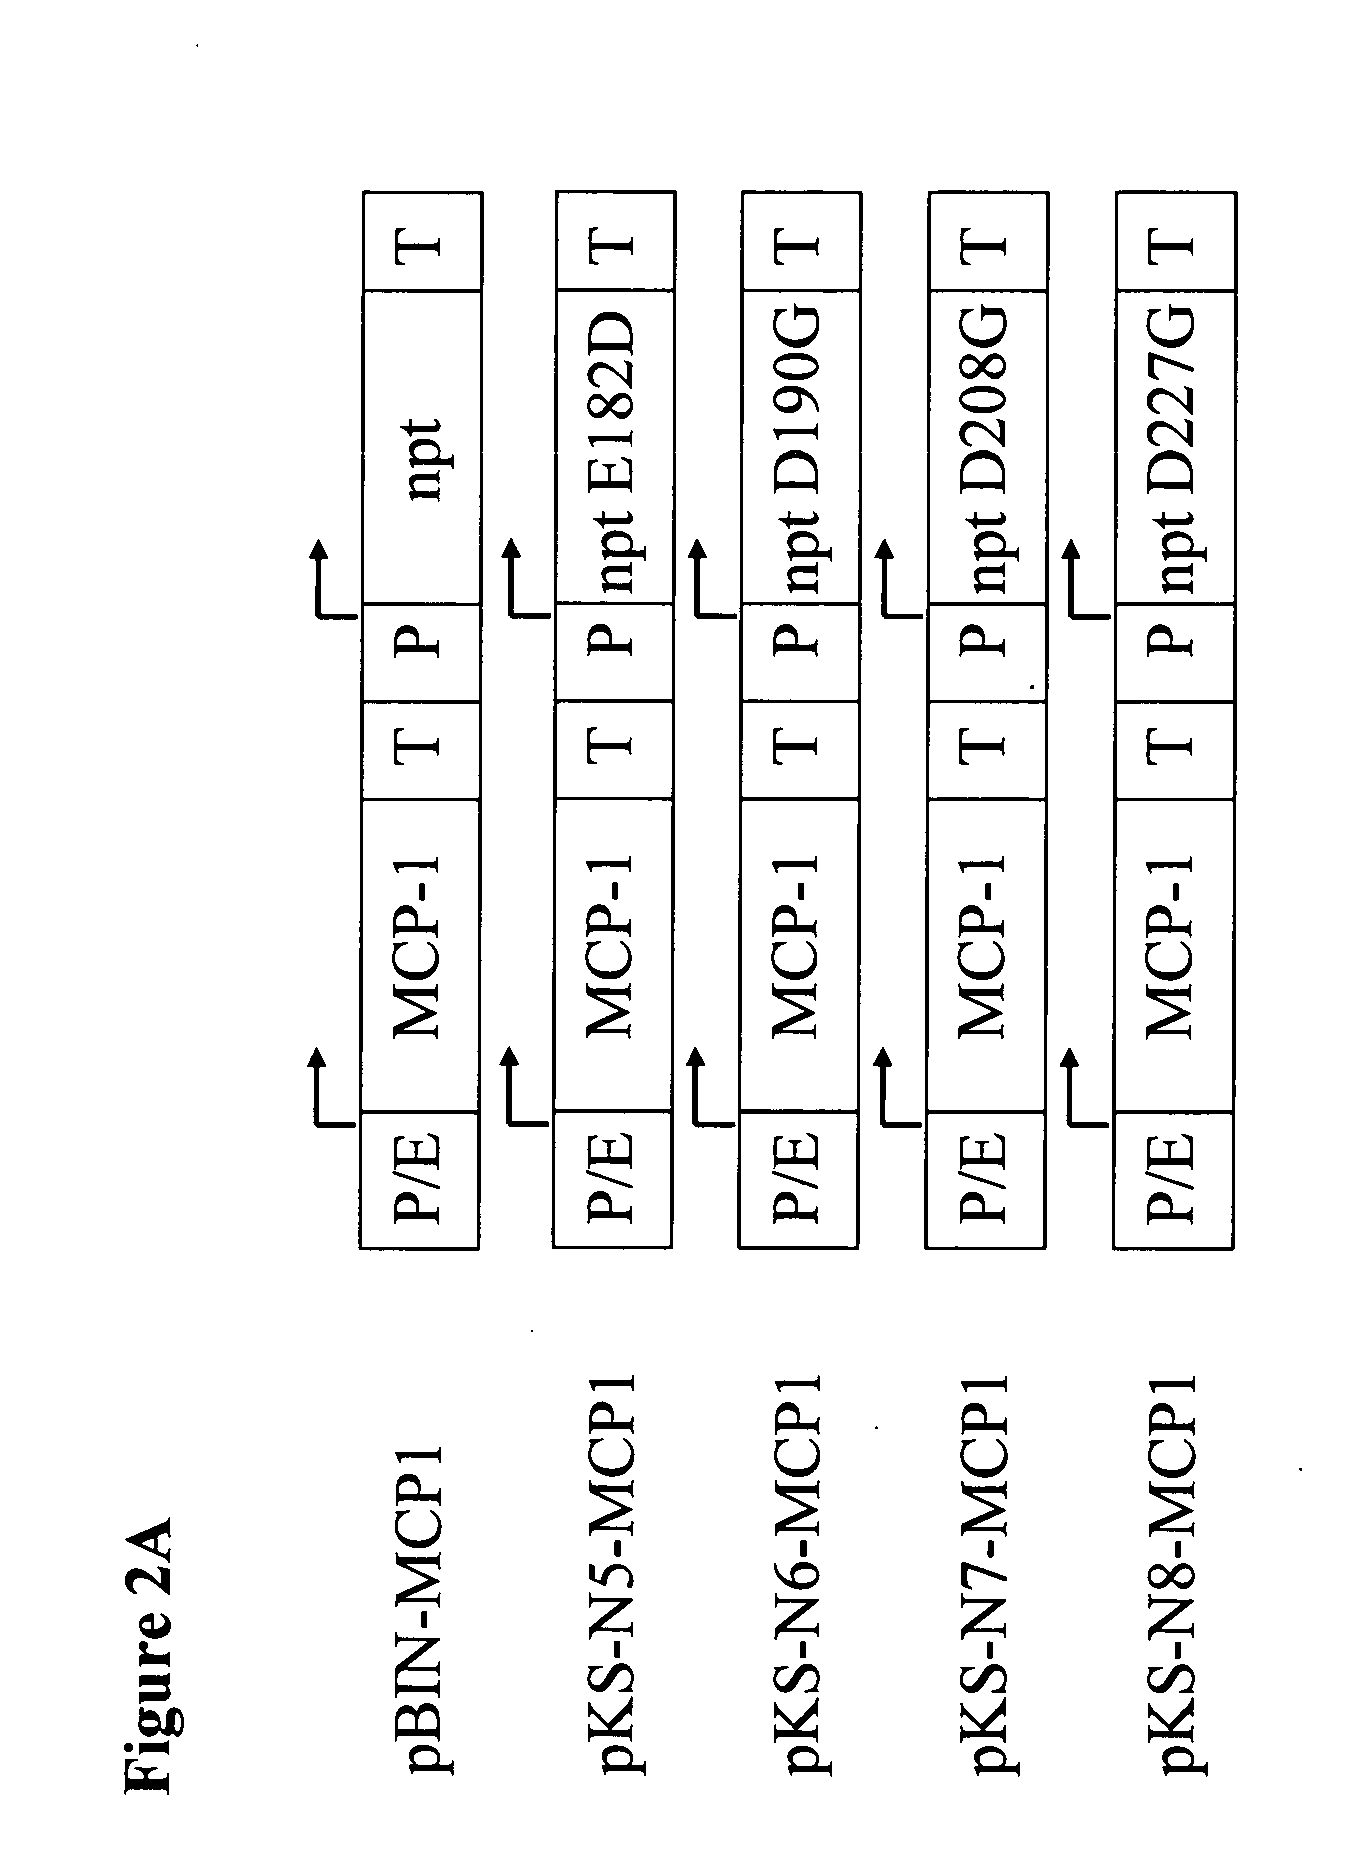 Neomycin-phosphotransferase-genes and methods for the selection for recombinant cells producing high levels of a desired gene product